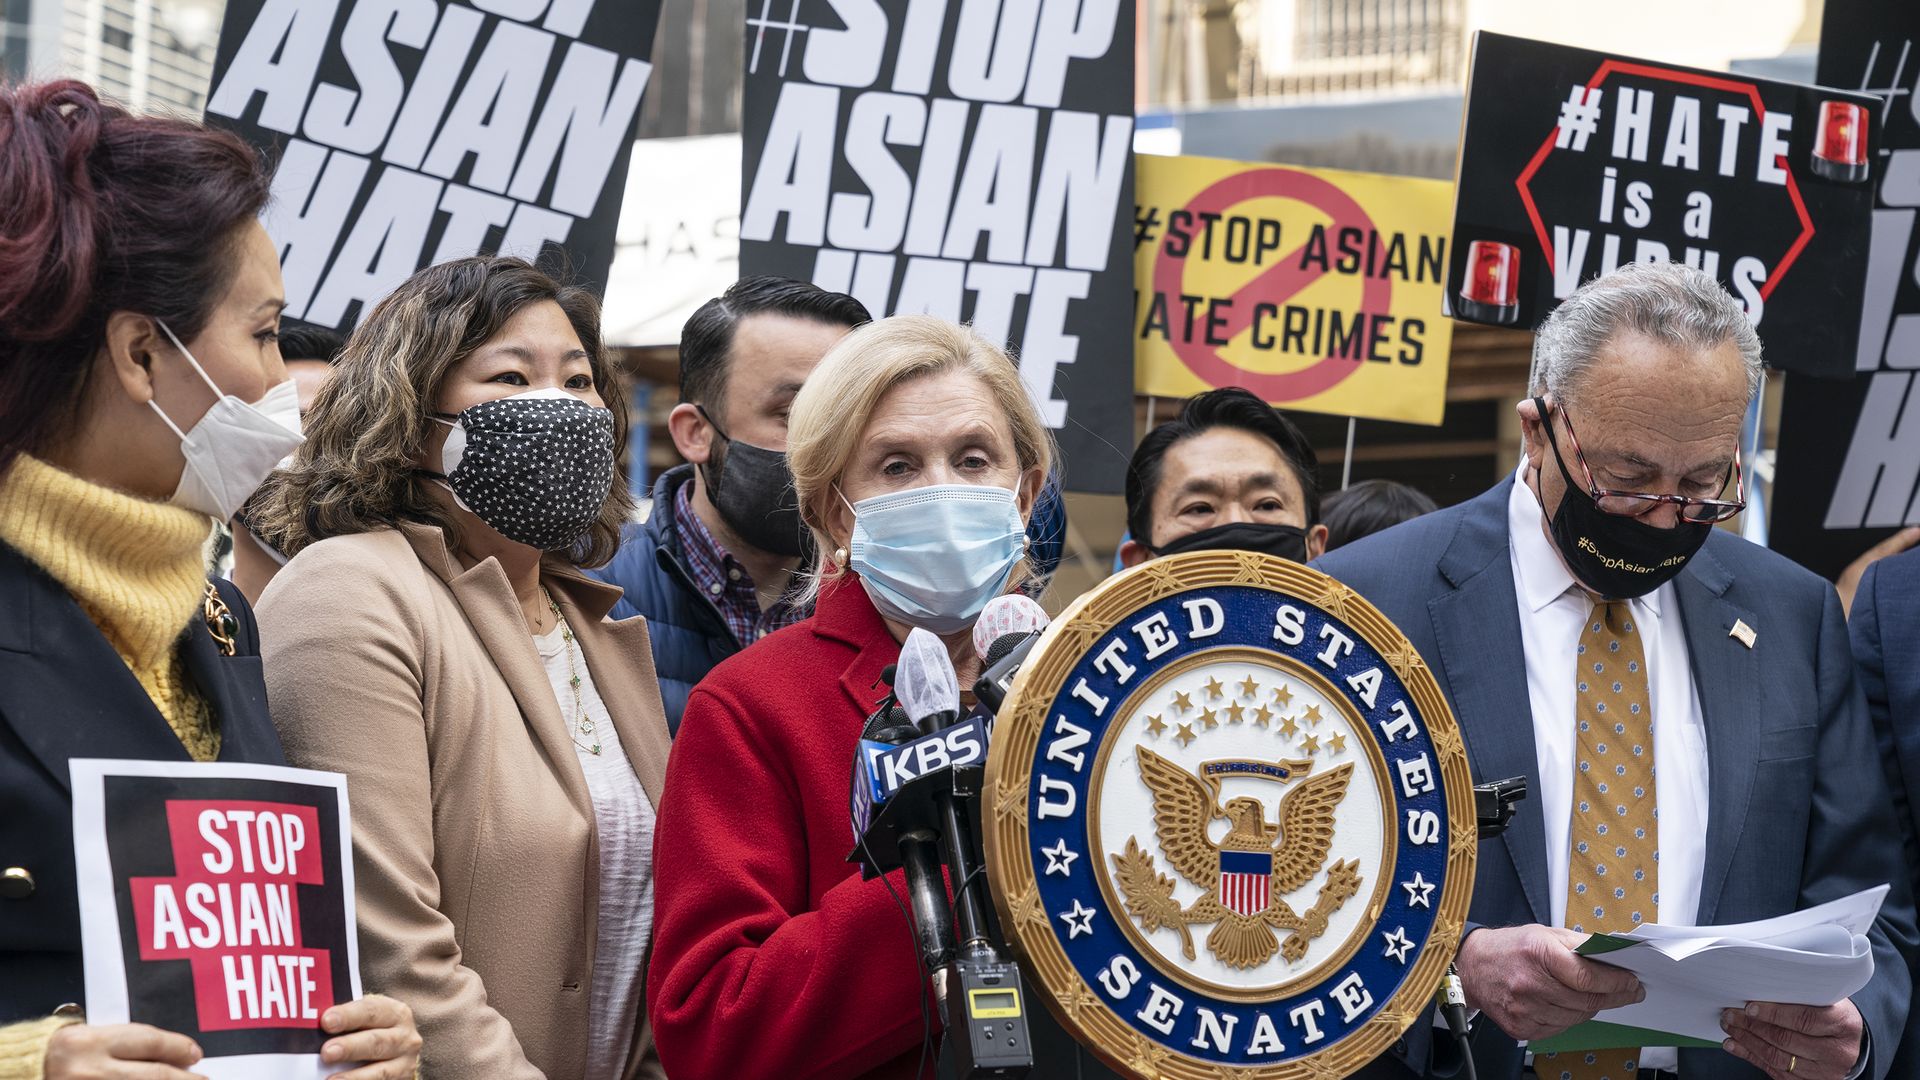 U. S. Representative Carolyn Maloney speaks at the rally. To her right is U. S. Representative Grace Meng. To her left Senate Majority Leader Charles Schumer.